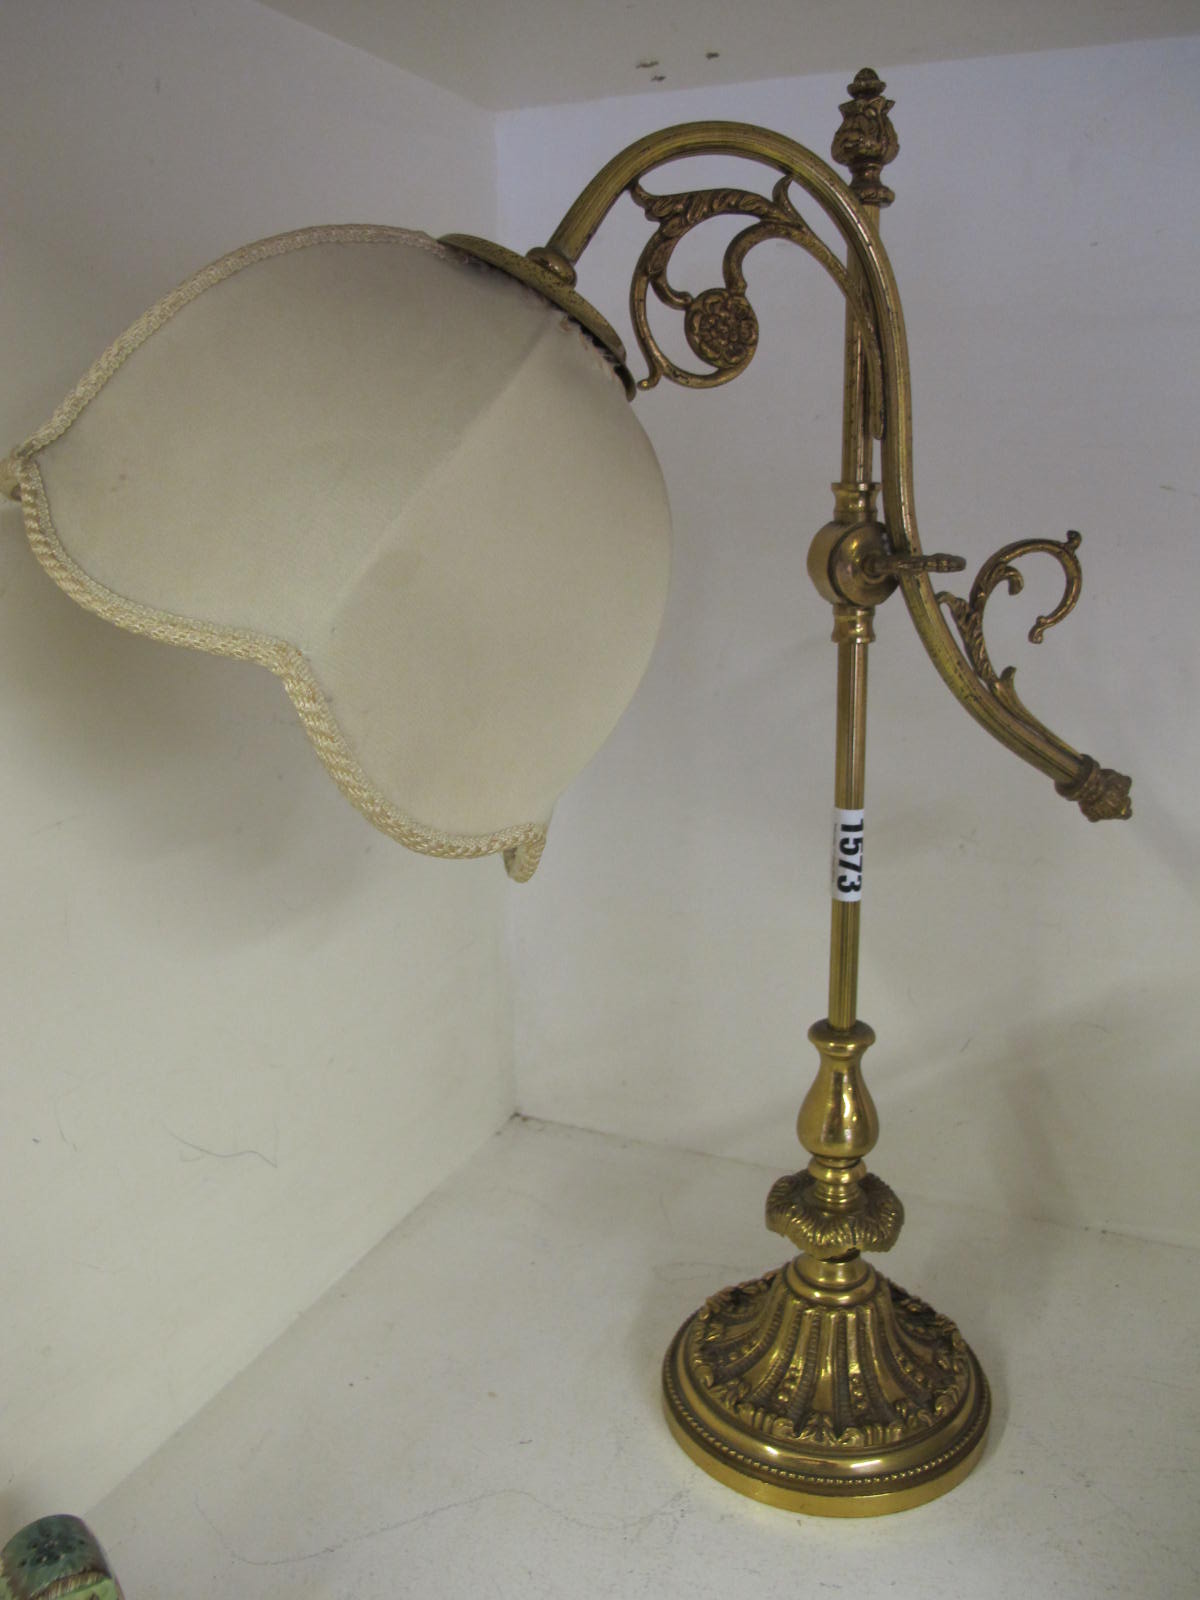 A vintage brass desk lamp and shade